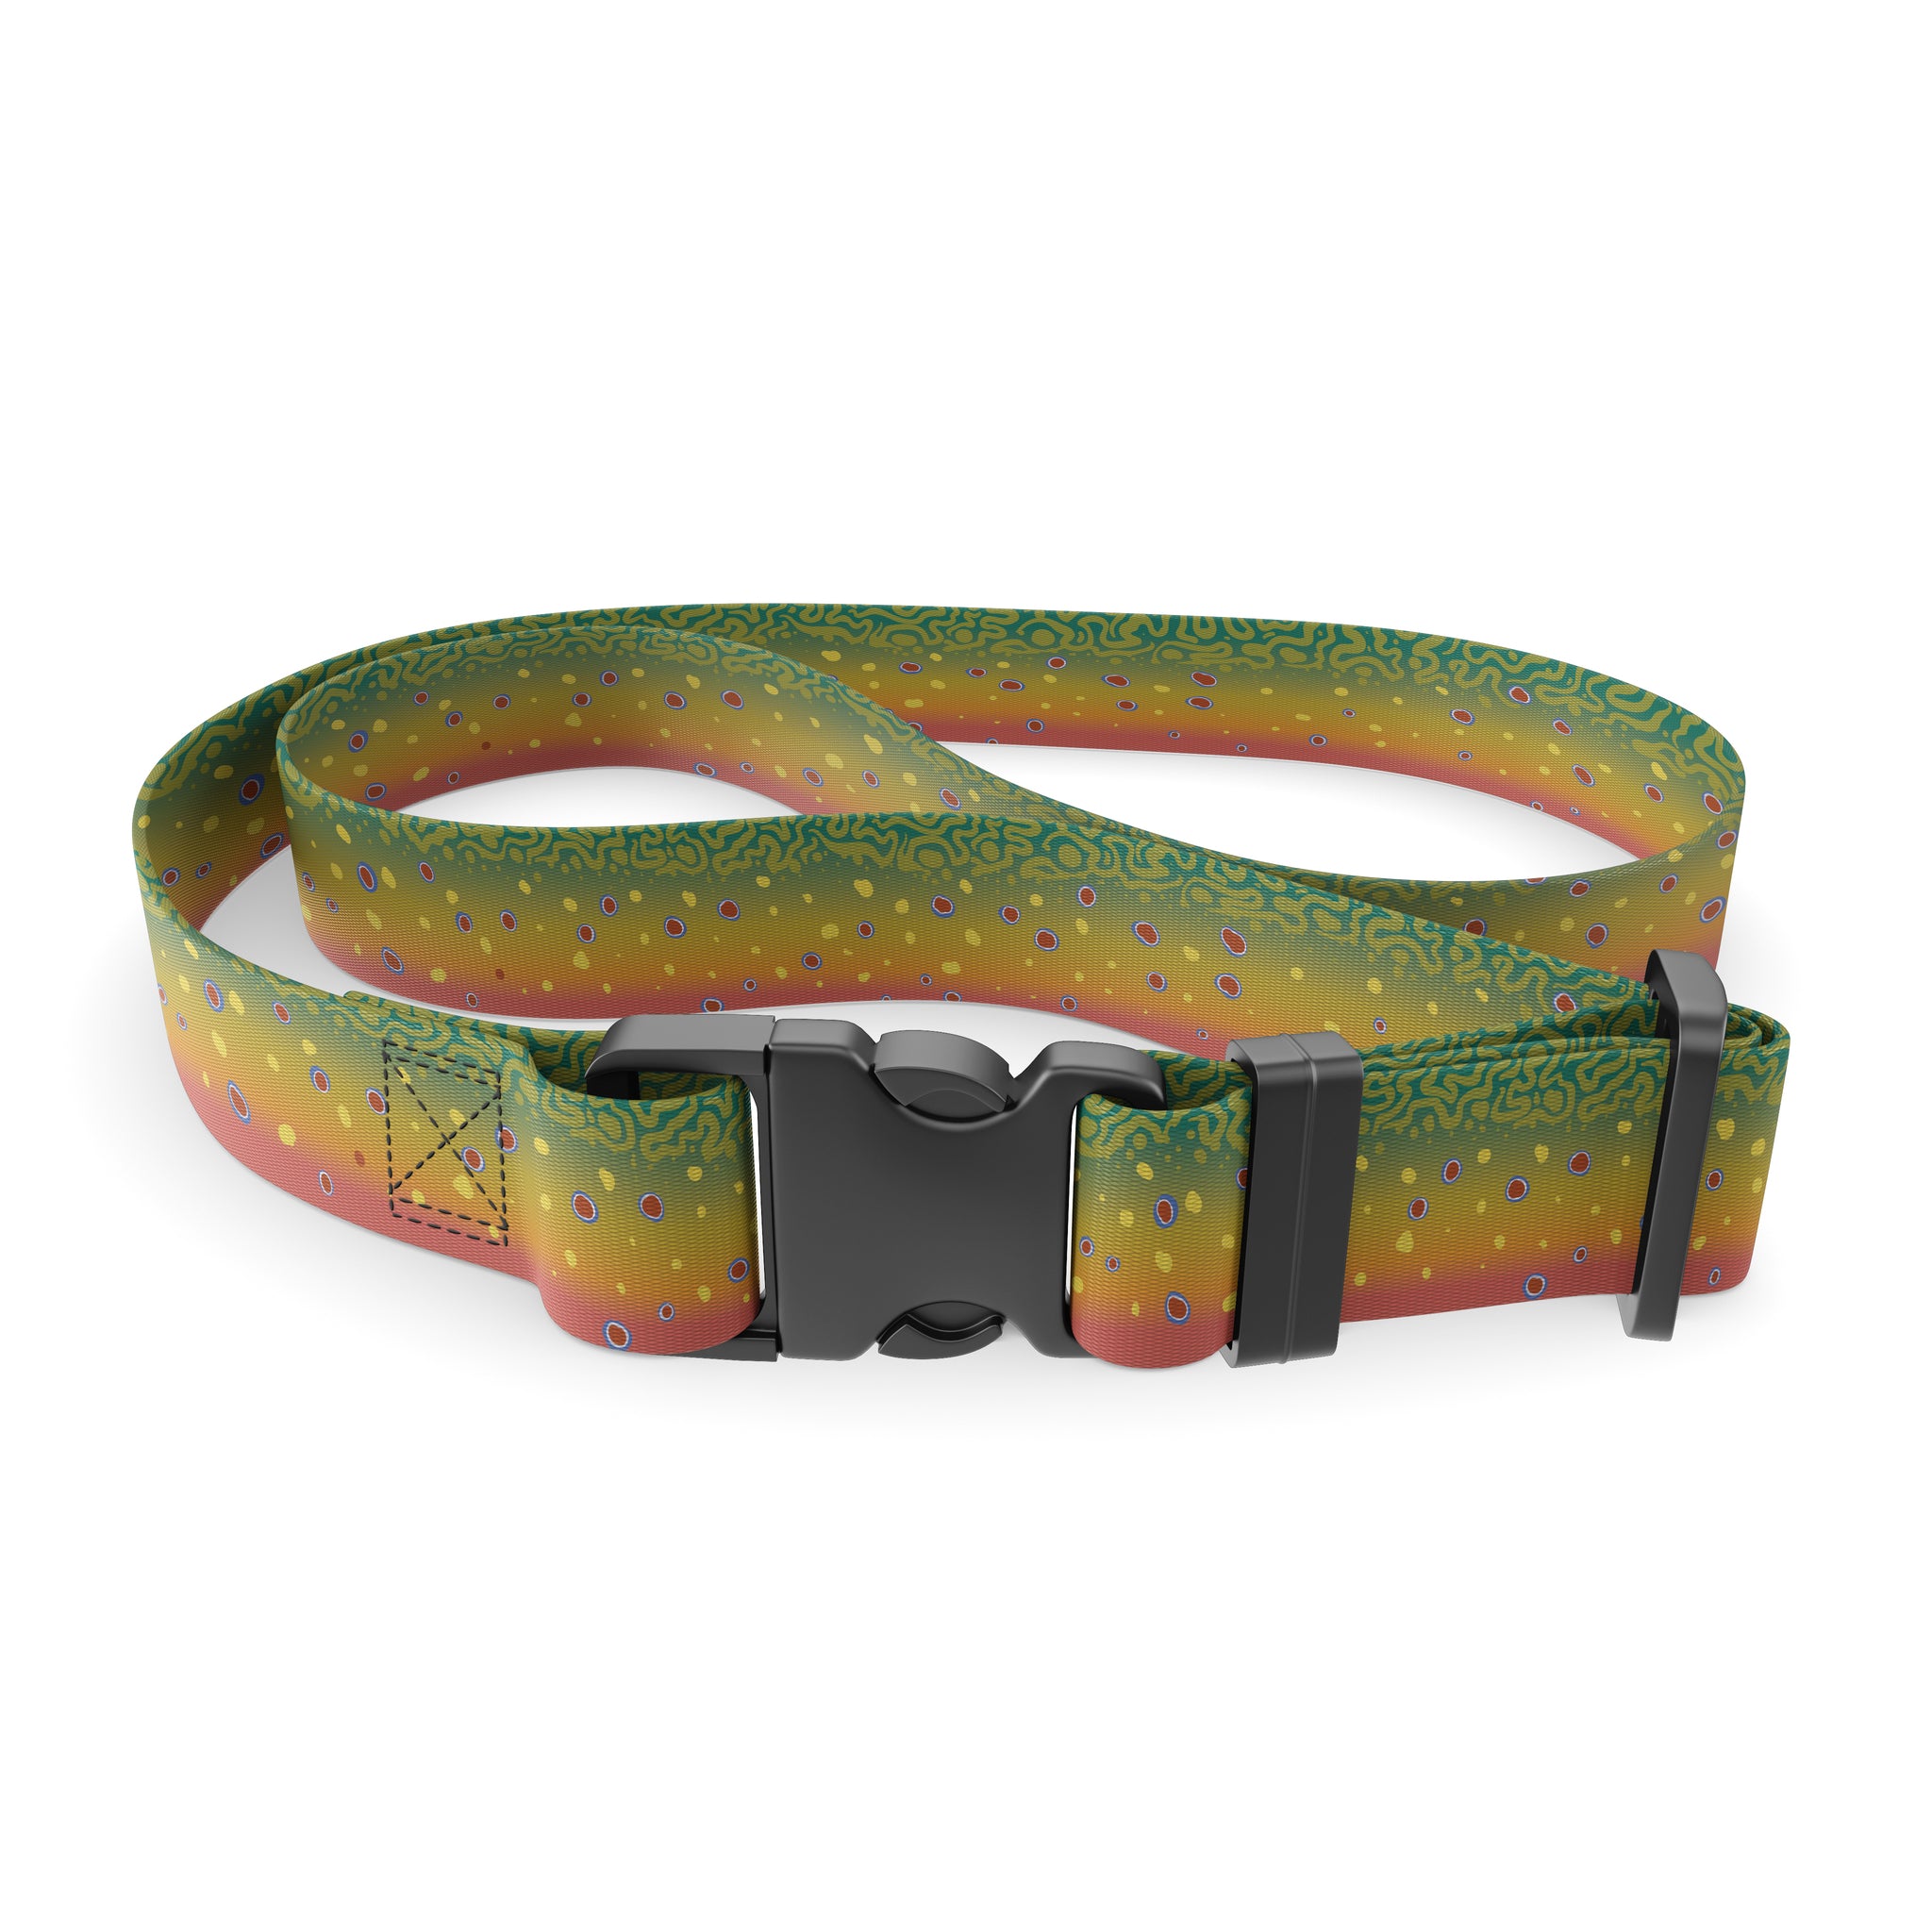 Stand Out Wading with the Cheeky Belt - Cheeky Fishing